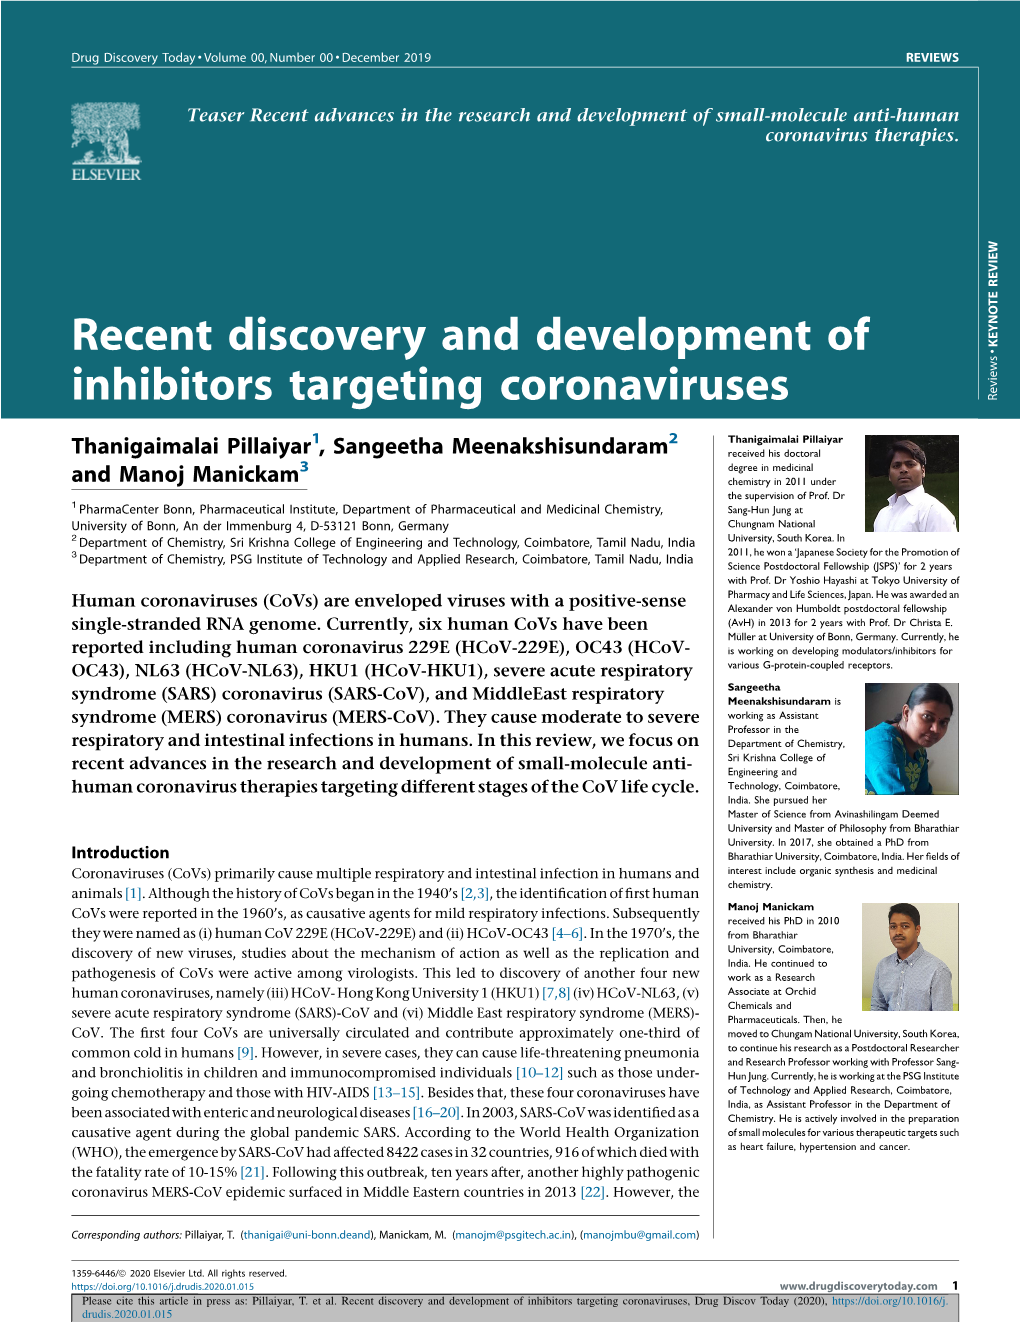 Recent Discovery and Development of Inhibitors Targeting Coronaviruses, Drug Discov Today (2020)